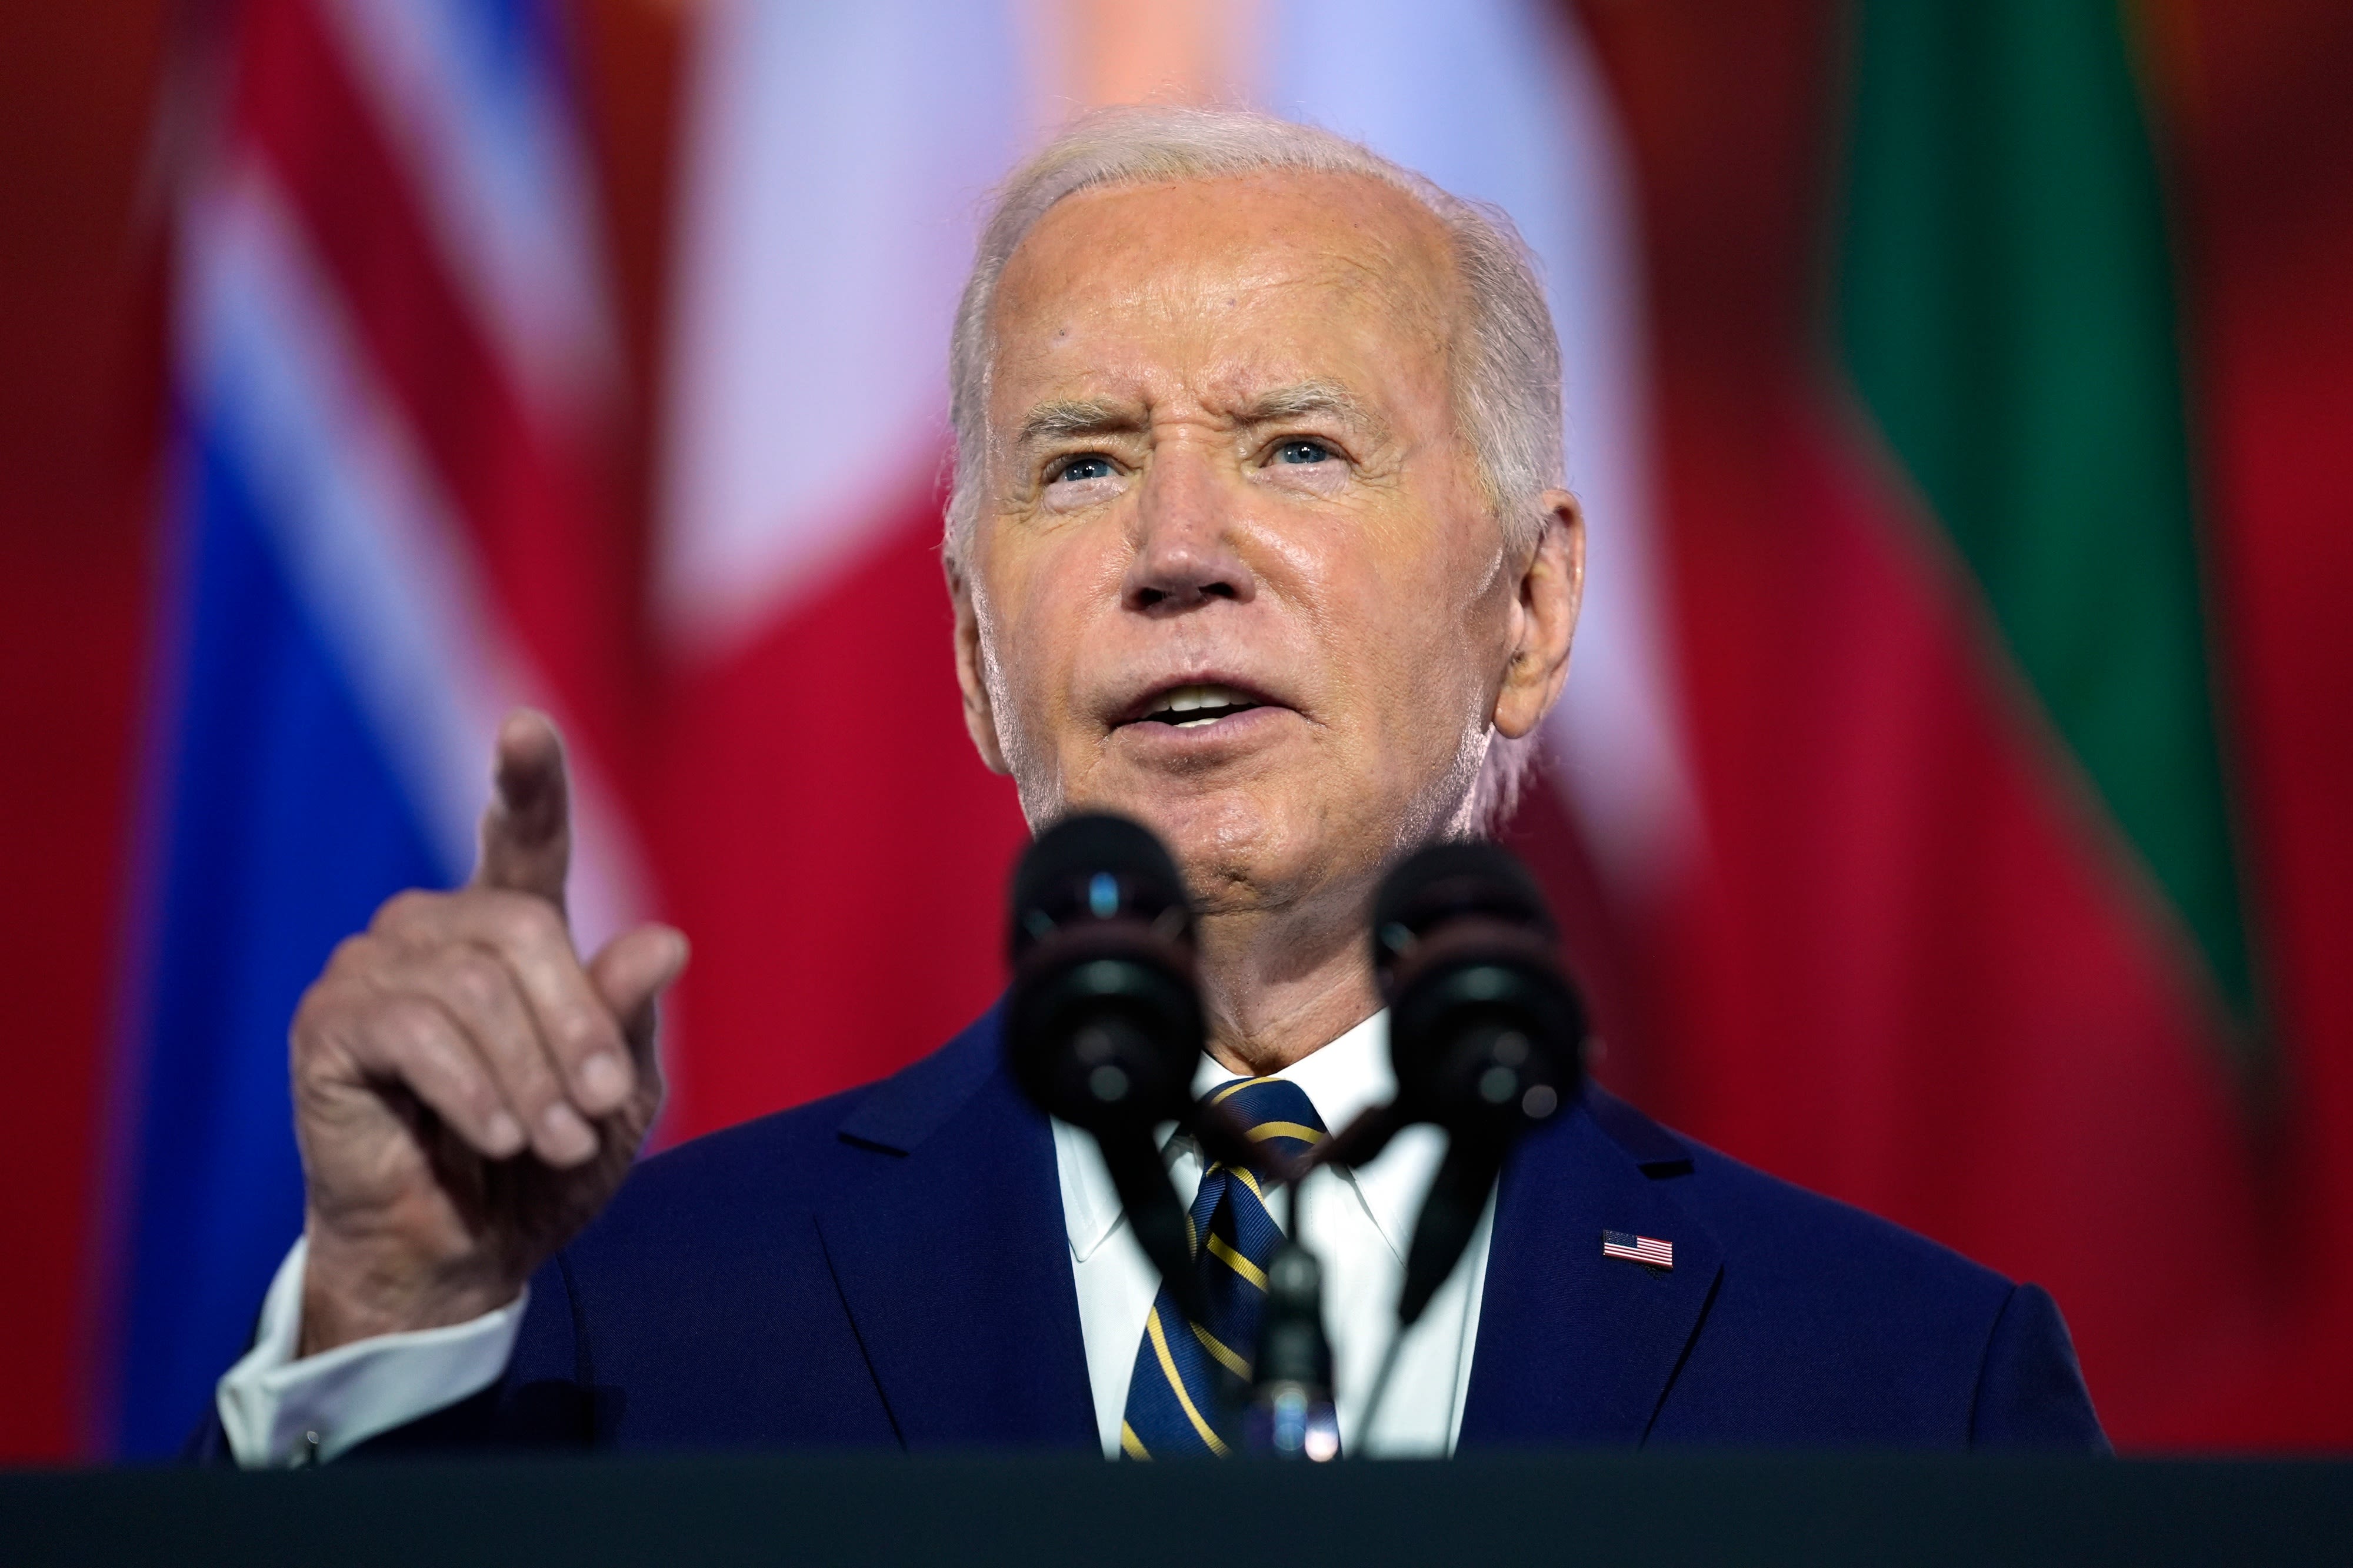 Opinion | At what point should Democrats give up on Biden dropping out?